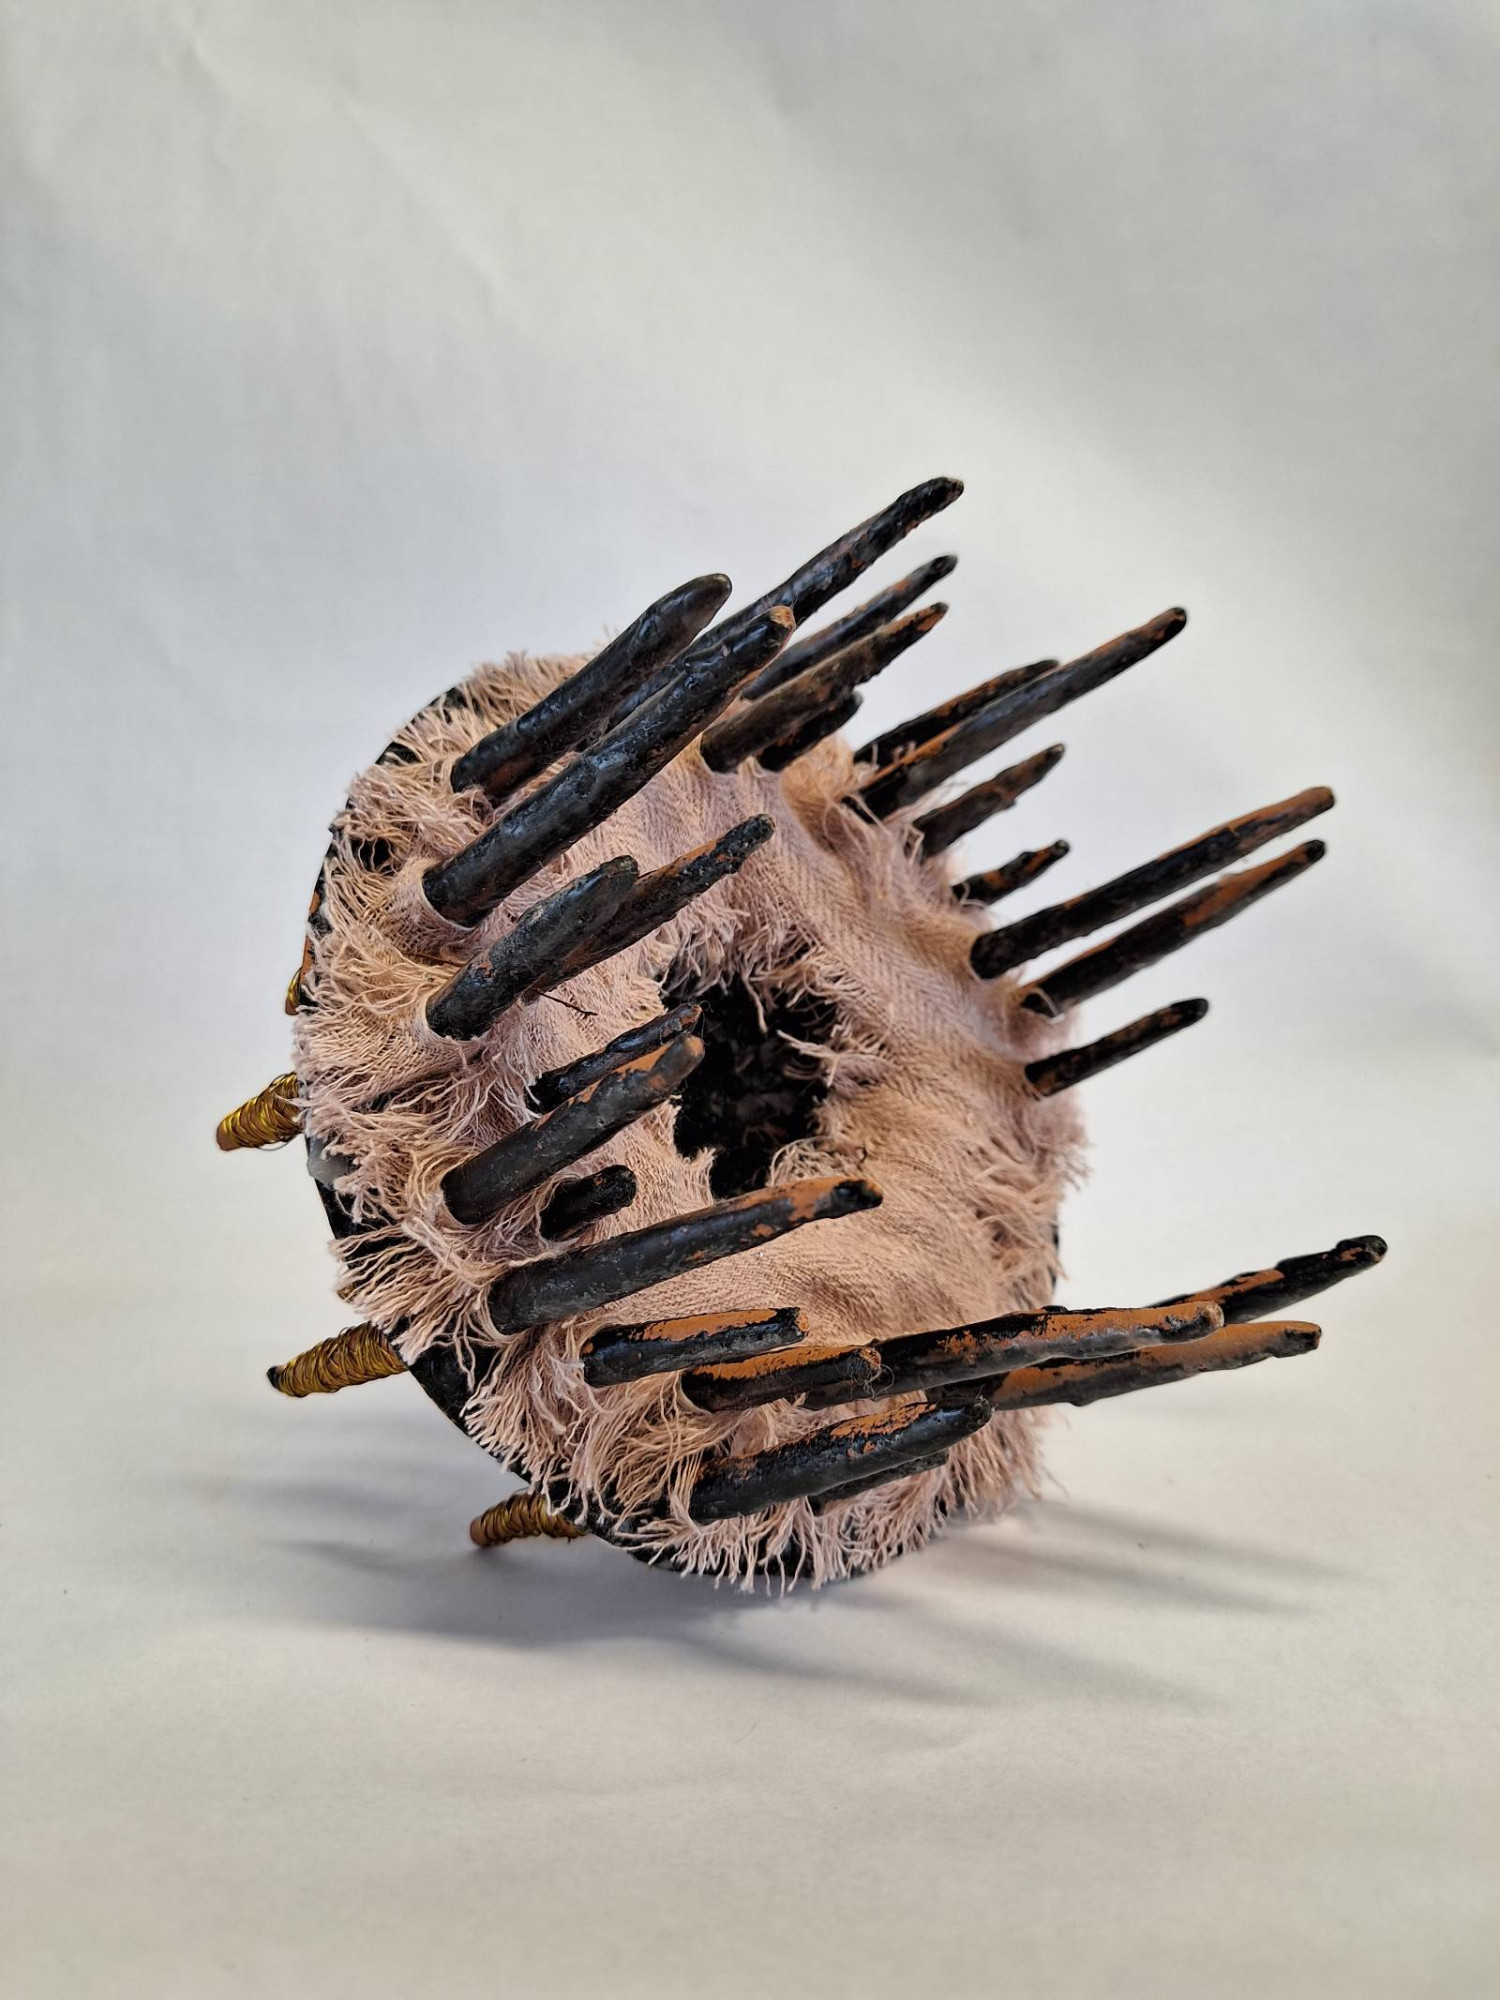 *Tobar,* earthenware, wax, wire and fabric, 20 x 20 x 17cm